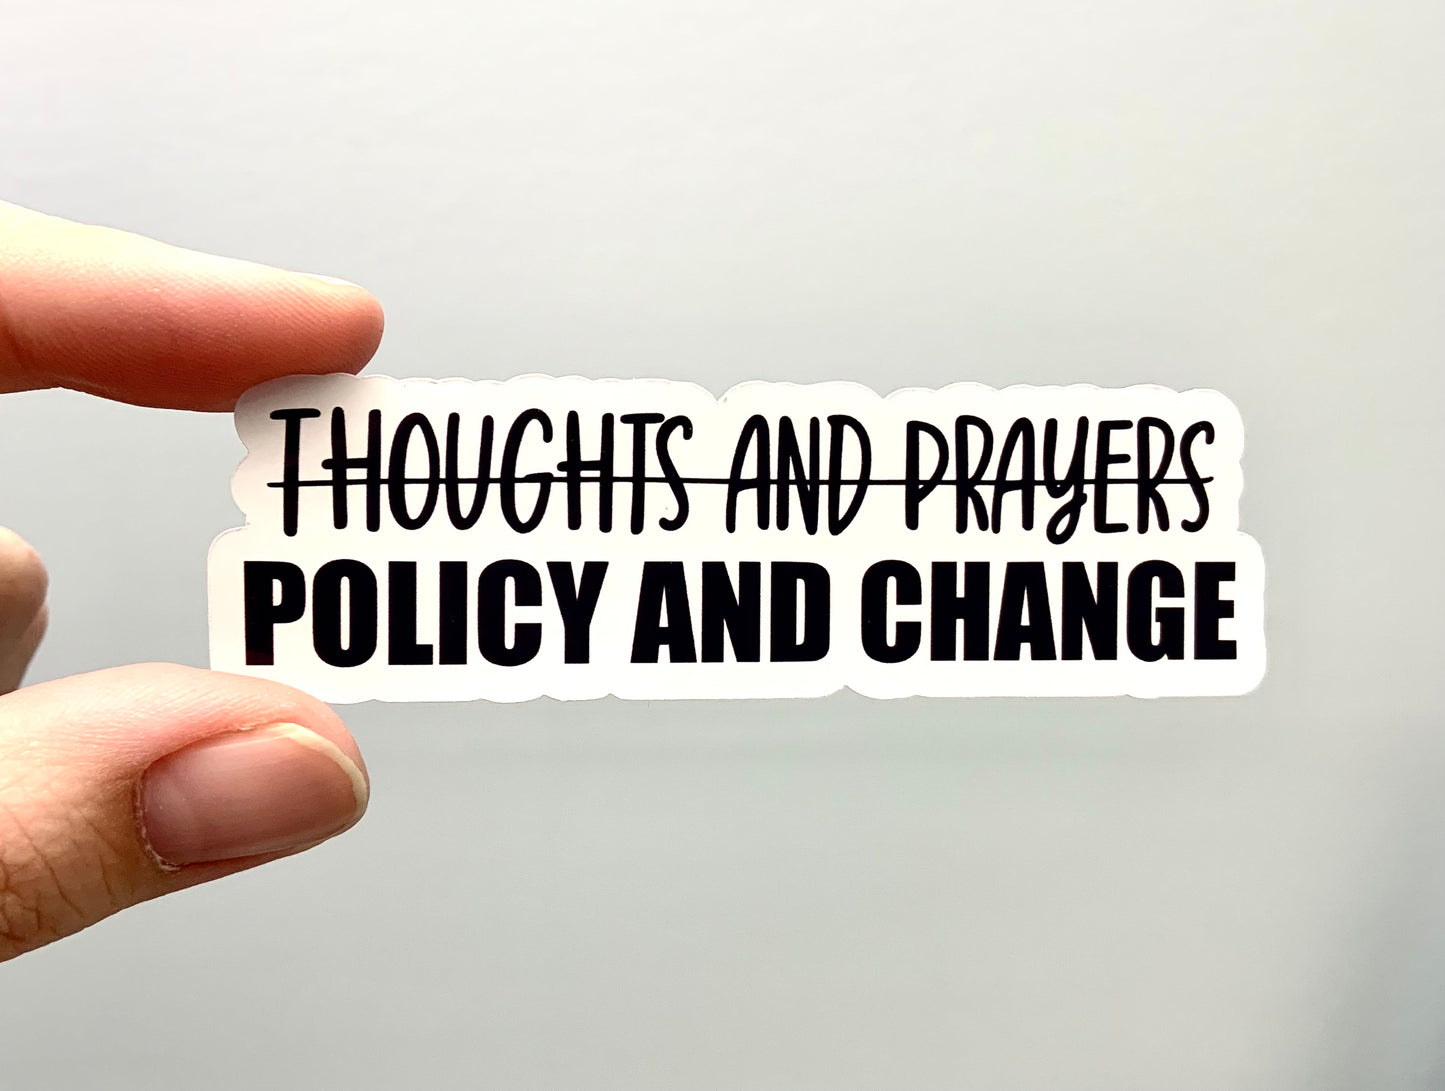 Policy and change (pack of 3 or 5 stickers)